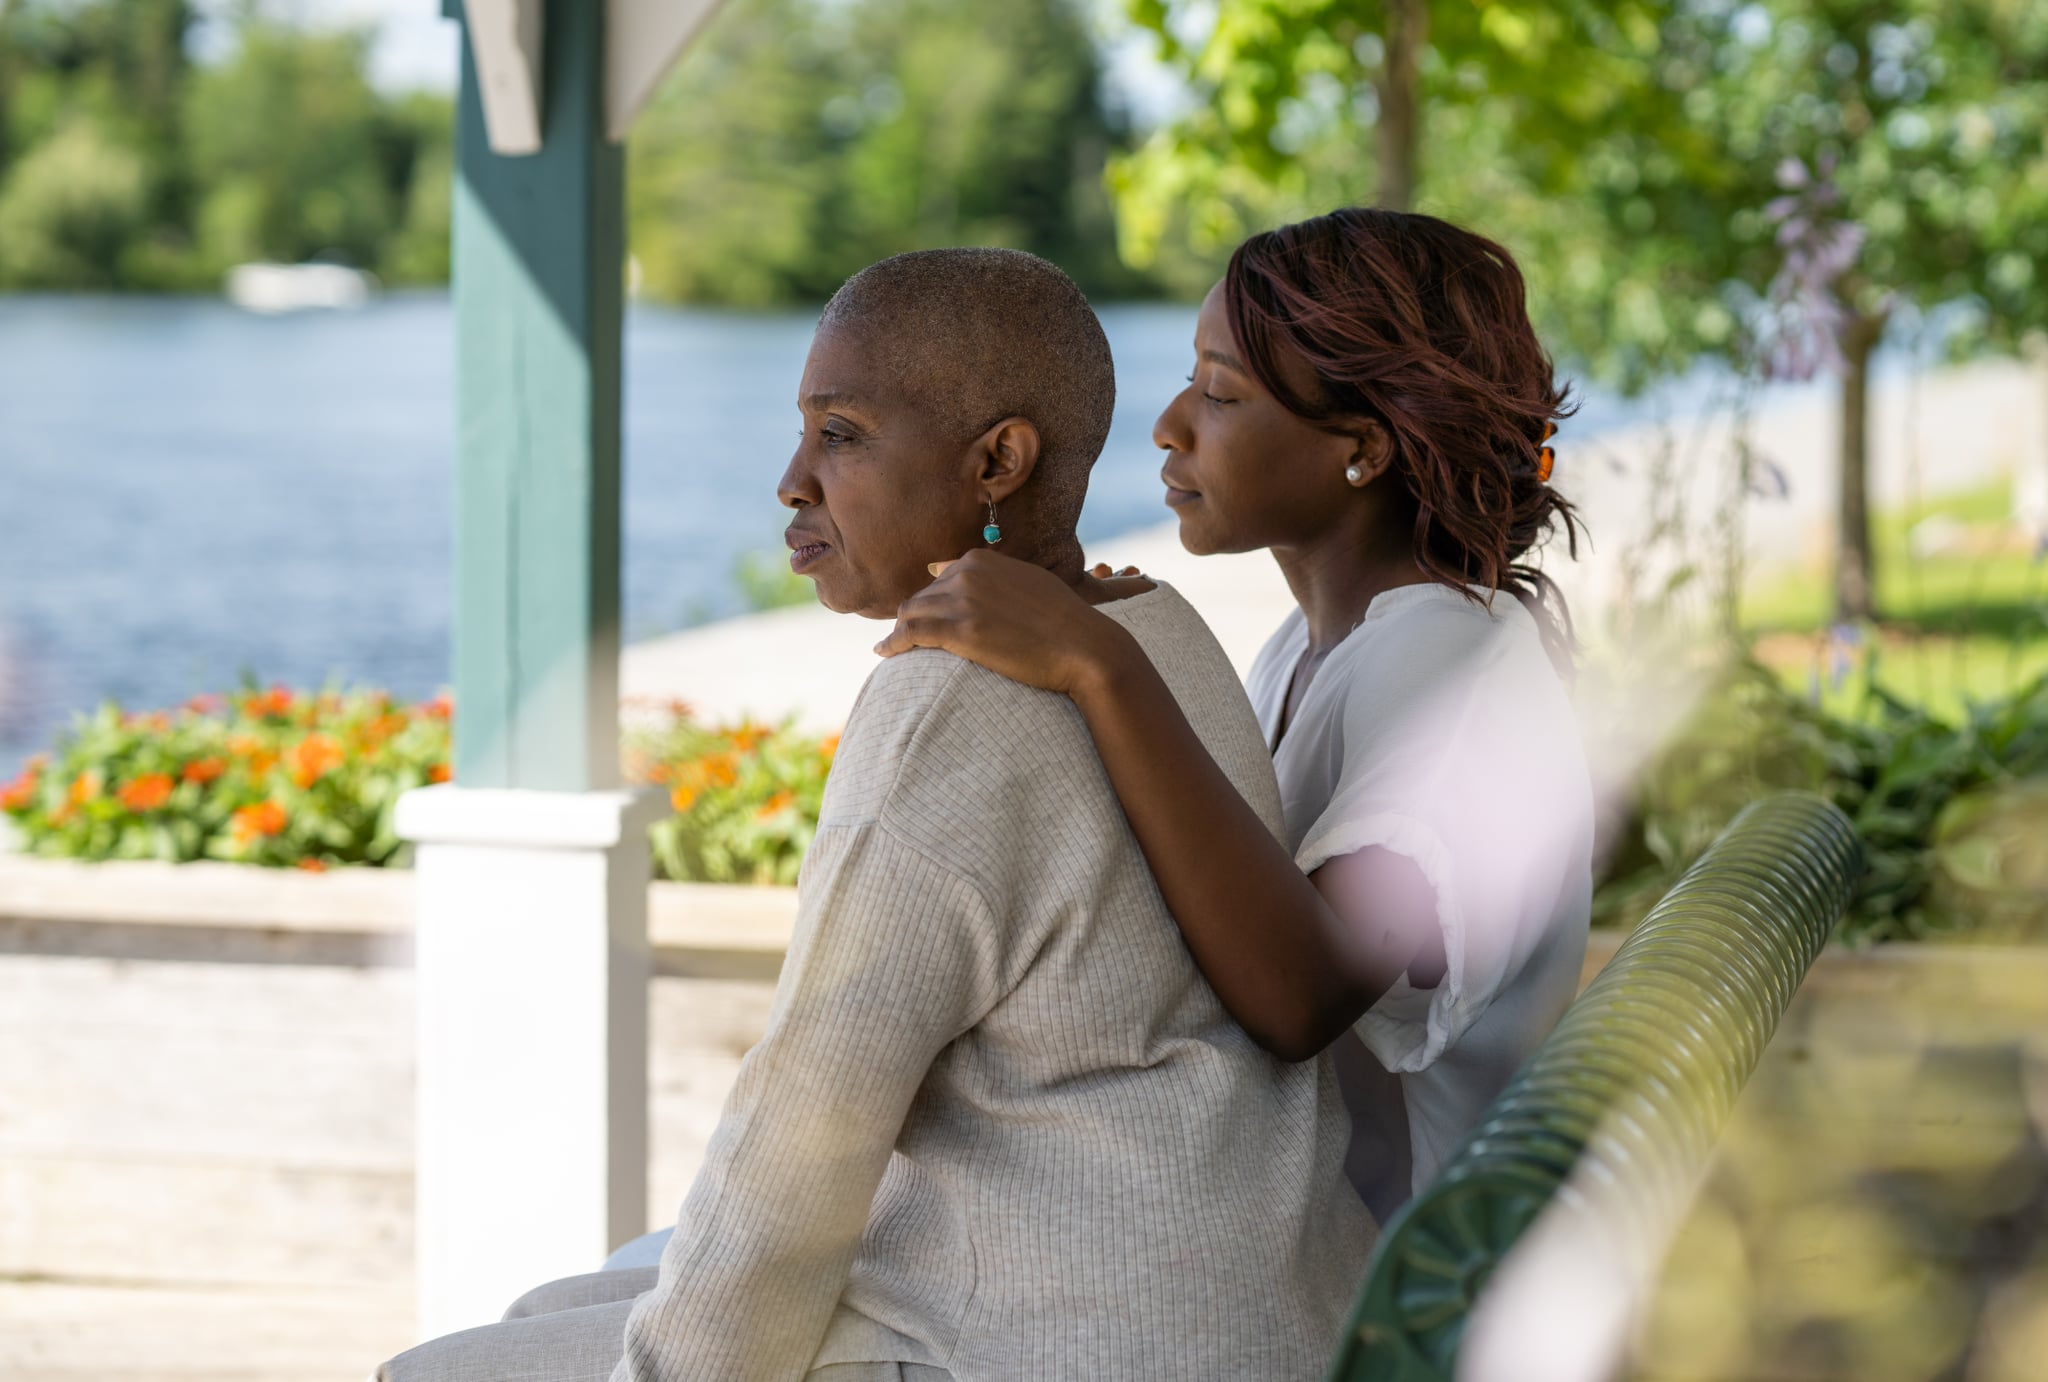 A young woman sits outside beside her Mother, with her arm around her and one hand on her shoulder. They are looking out over the water as she tries to comfort and support her Mother through her cancer diagnosis. They are both dressed casually as they spend time together in the sunshine trying to make the best of their time together.